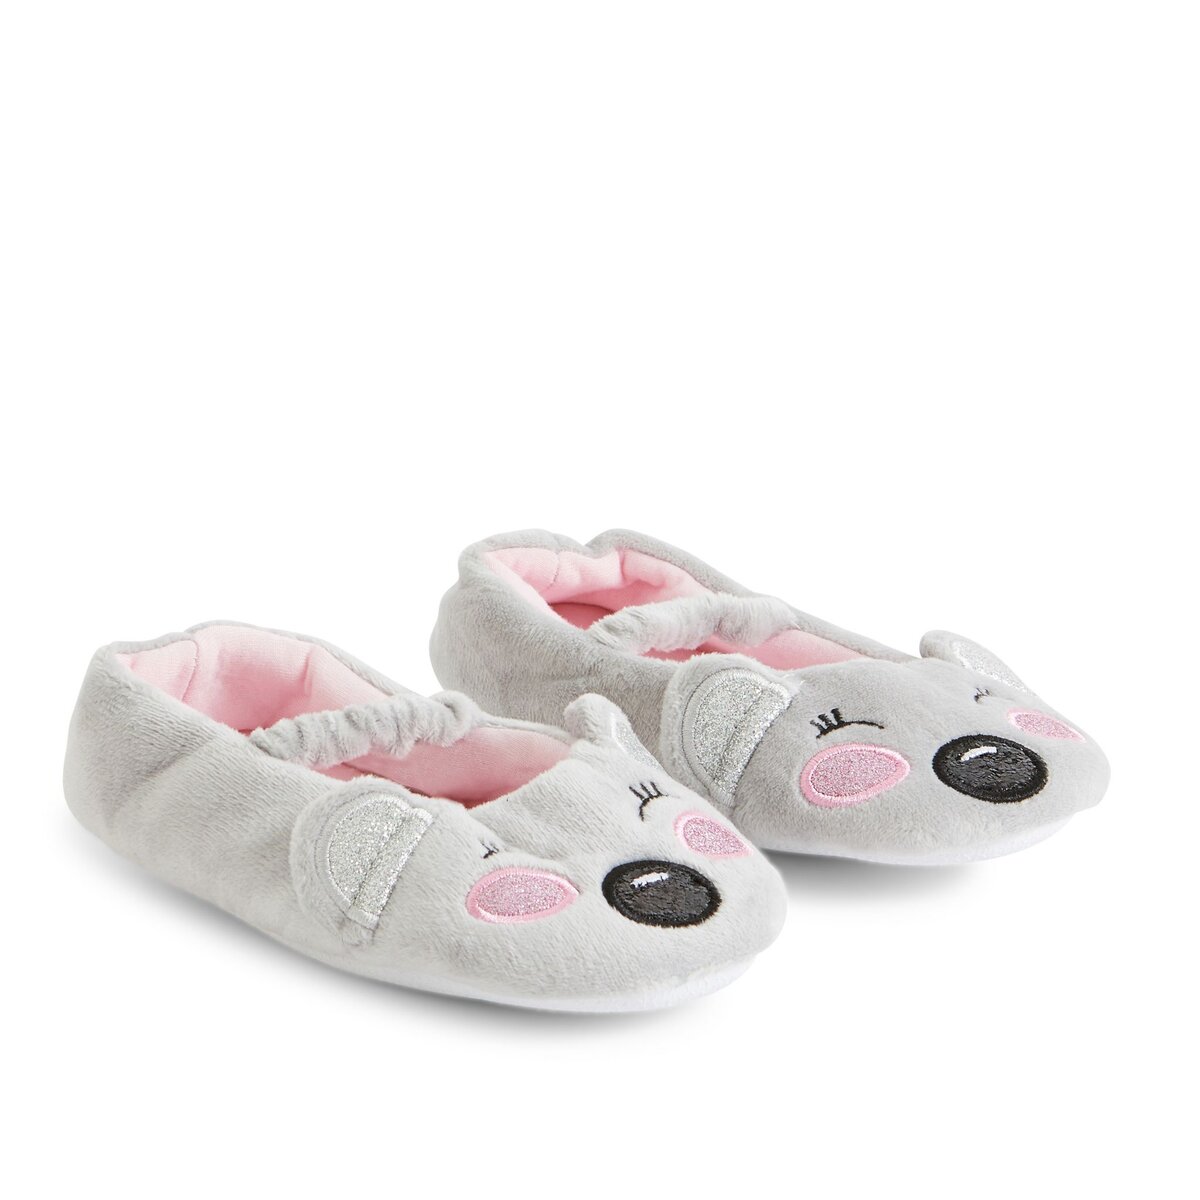 IN EXTENSO Chaussons ballerines koala fille